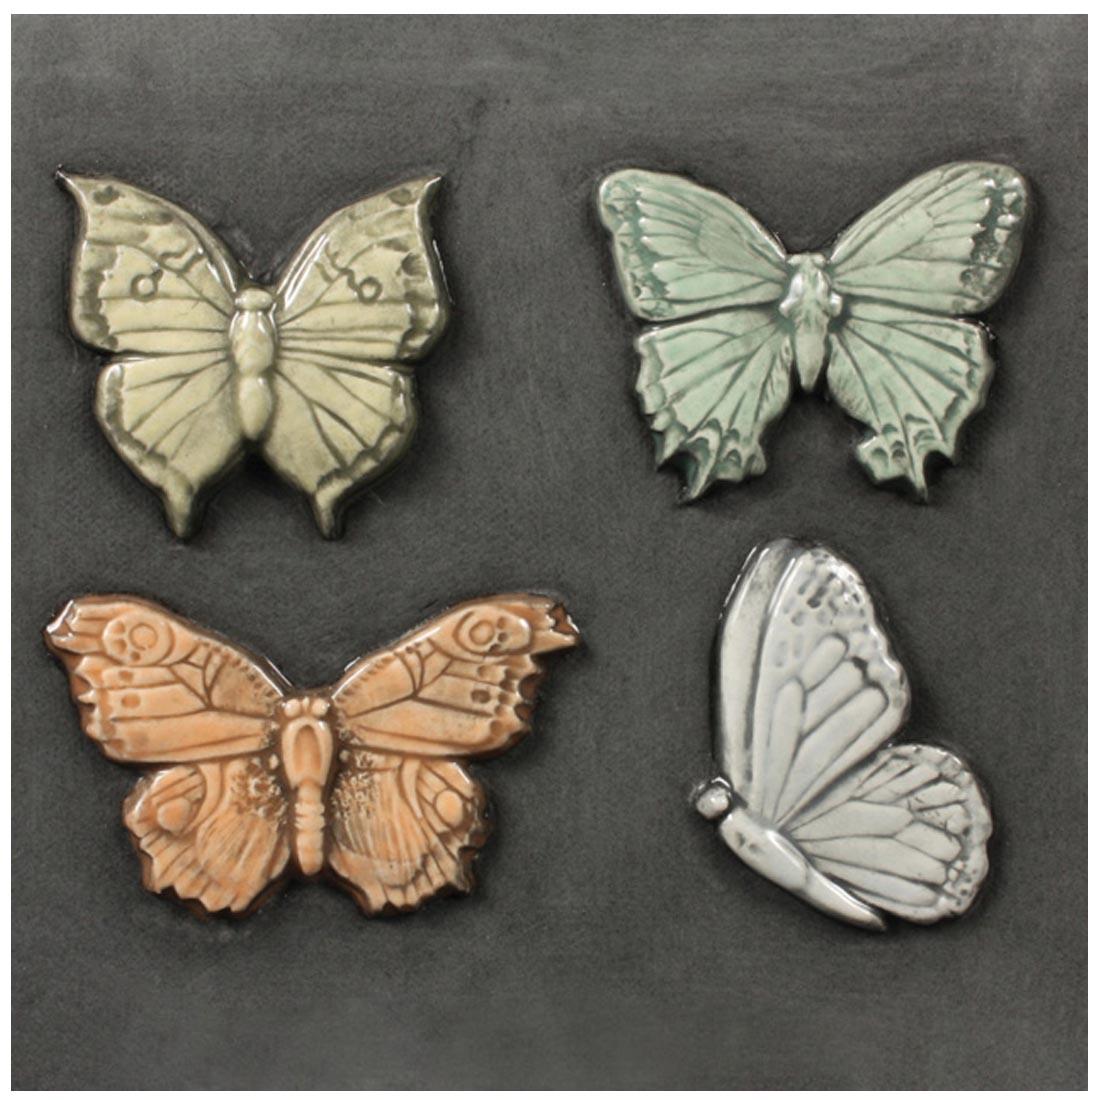 Clay pieces made with Mayco Butterflies Sprig Molds